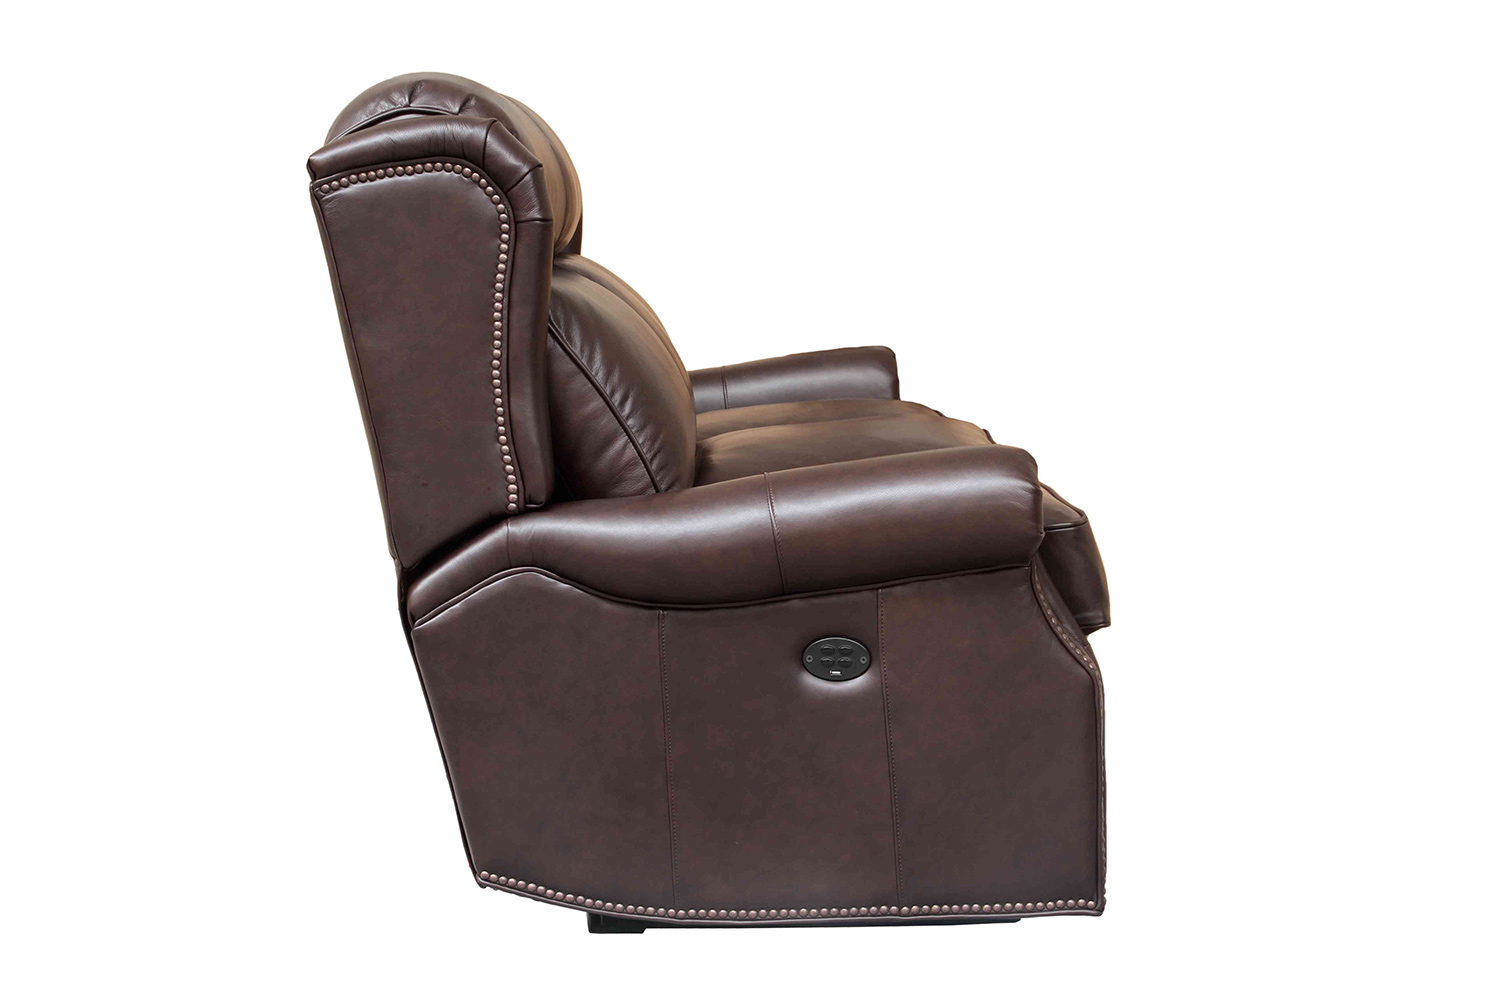 Barcalounger Southington Power Recliner Chair with Power Head Rest - Shoreham Dark Umber/All Leather